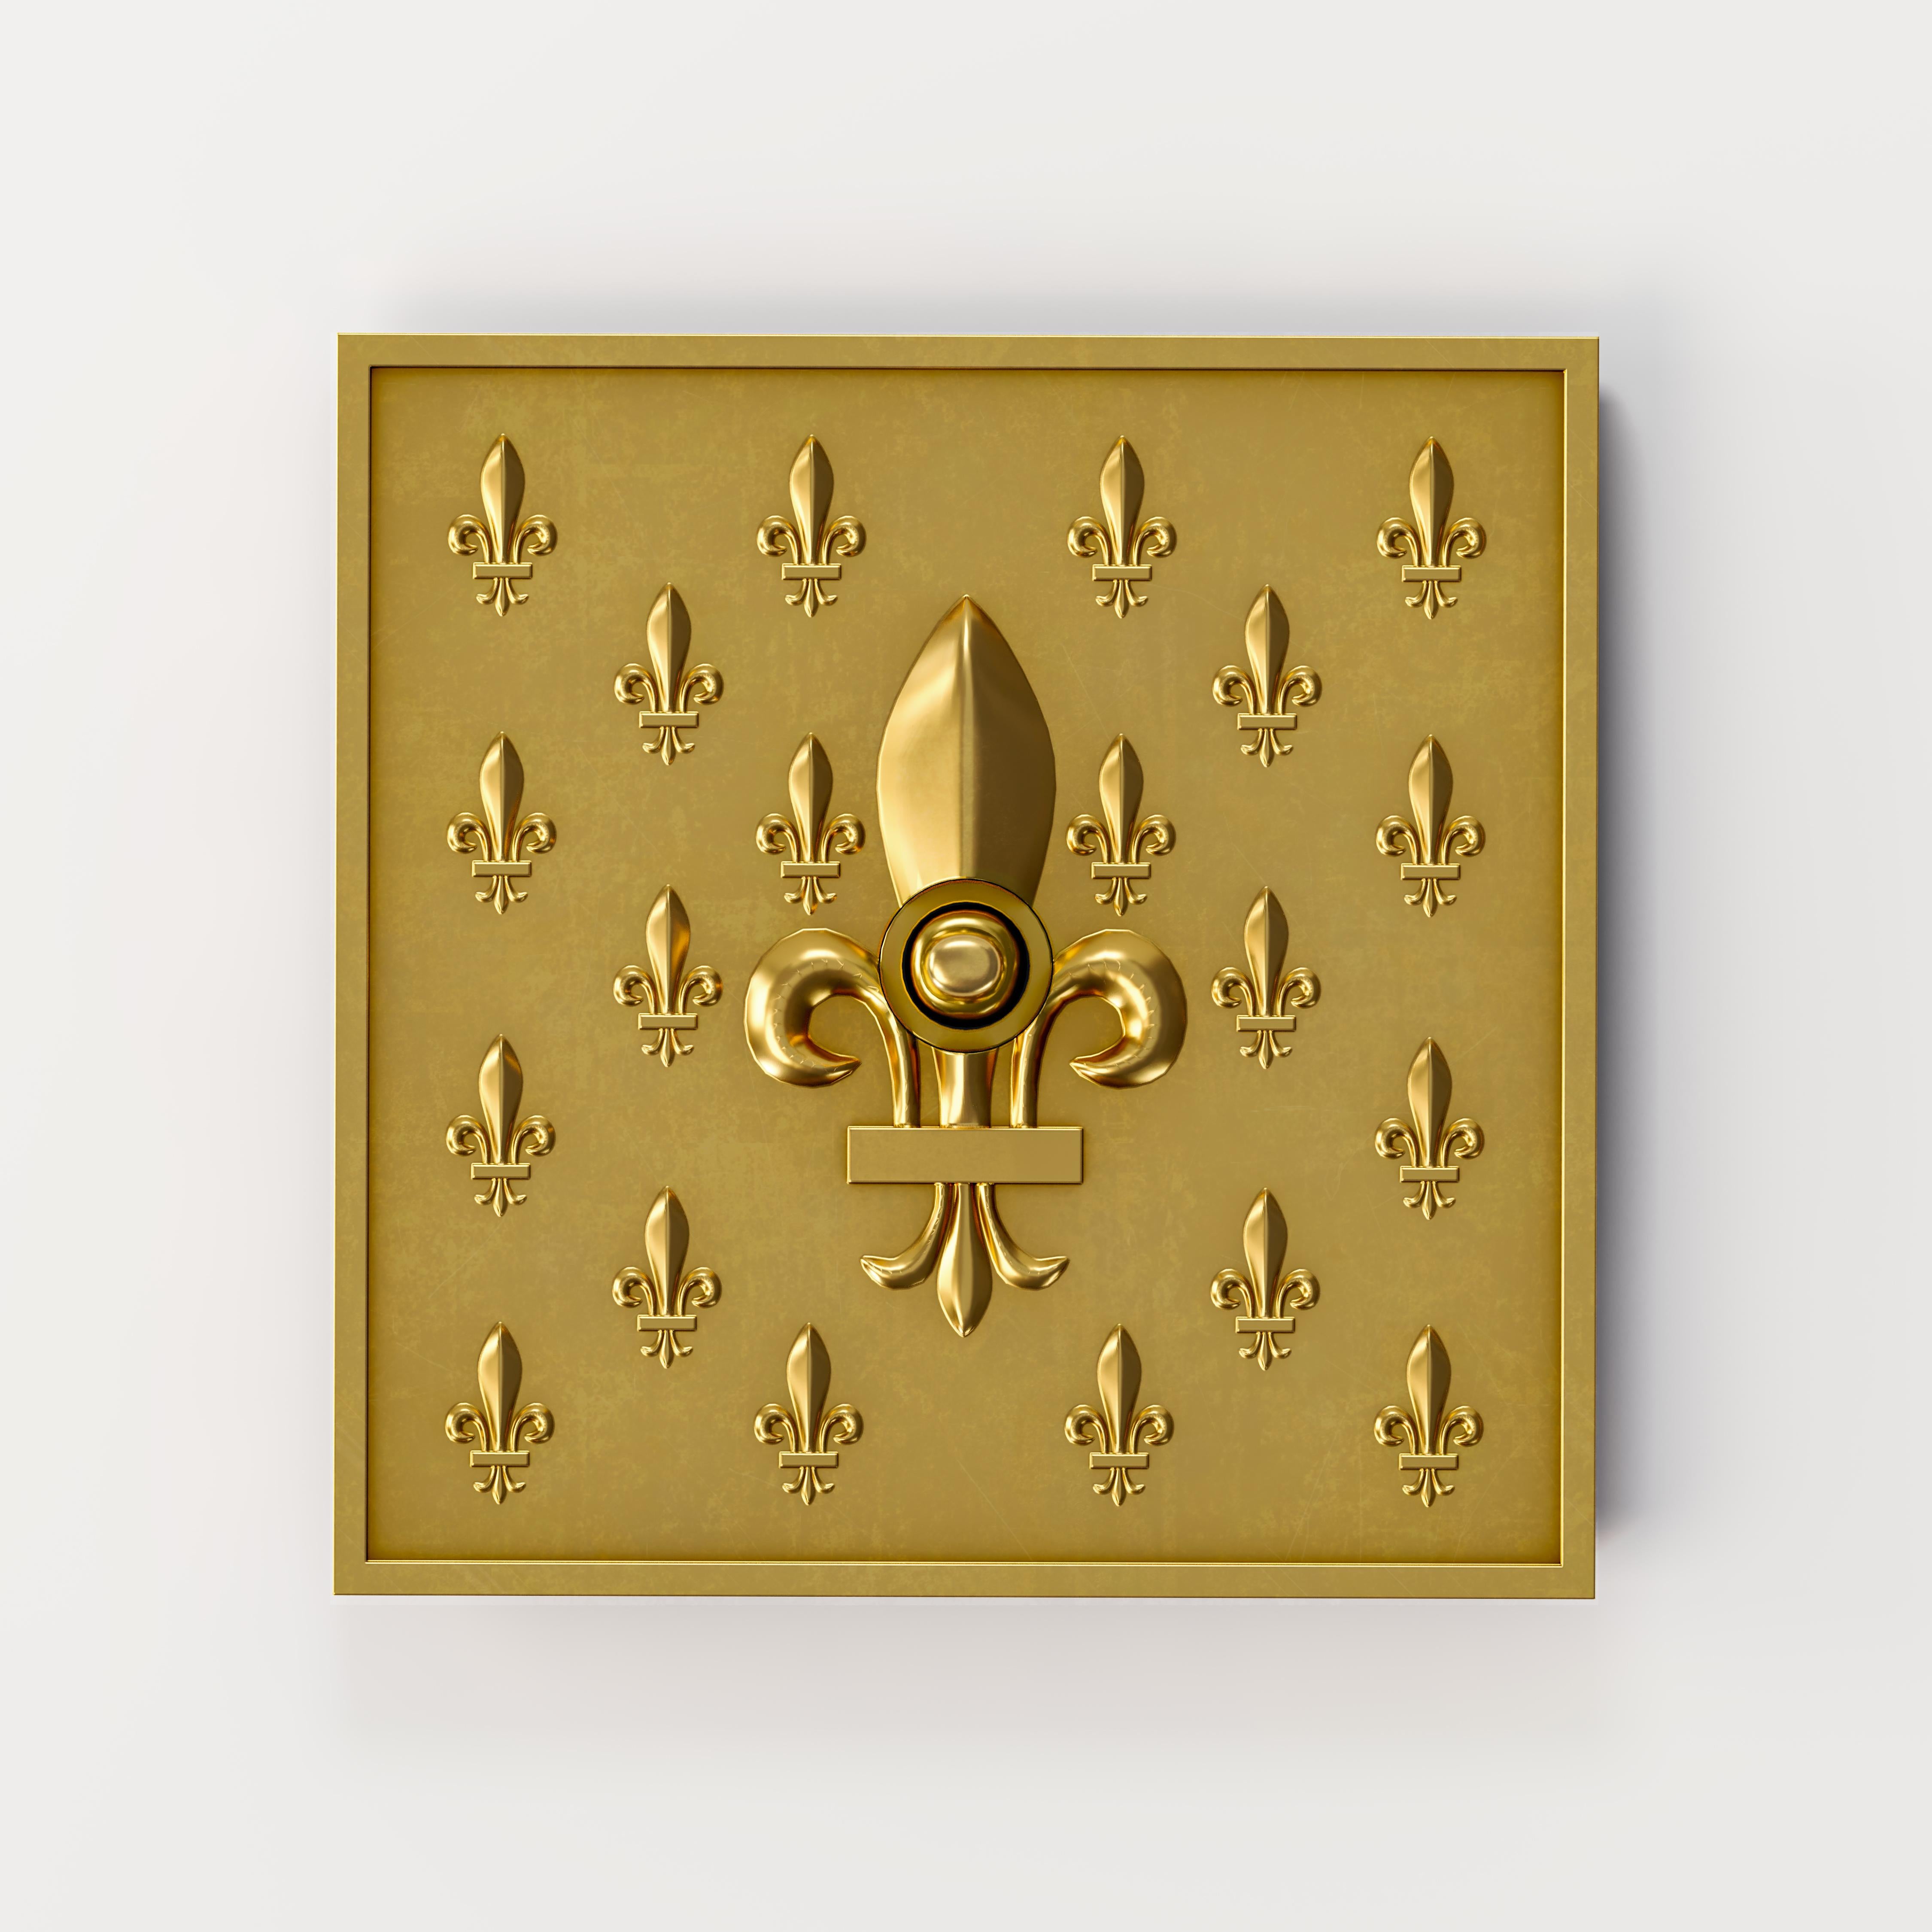 Versailles Doré Brass Light Socket by Jérôme Bugara
Dimensions: W 9,4 x H 9,4 cm.
Materials: Brass.

Available in different brass finishes. Please contact us.

Jérôme Bugara, trained at the prestigious Ecole Boulle, is a renowned interior architect